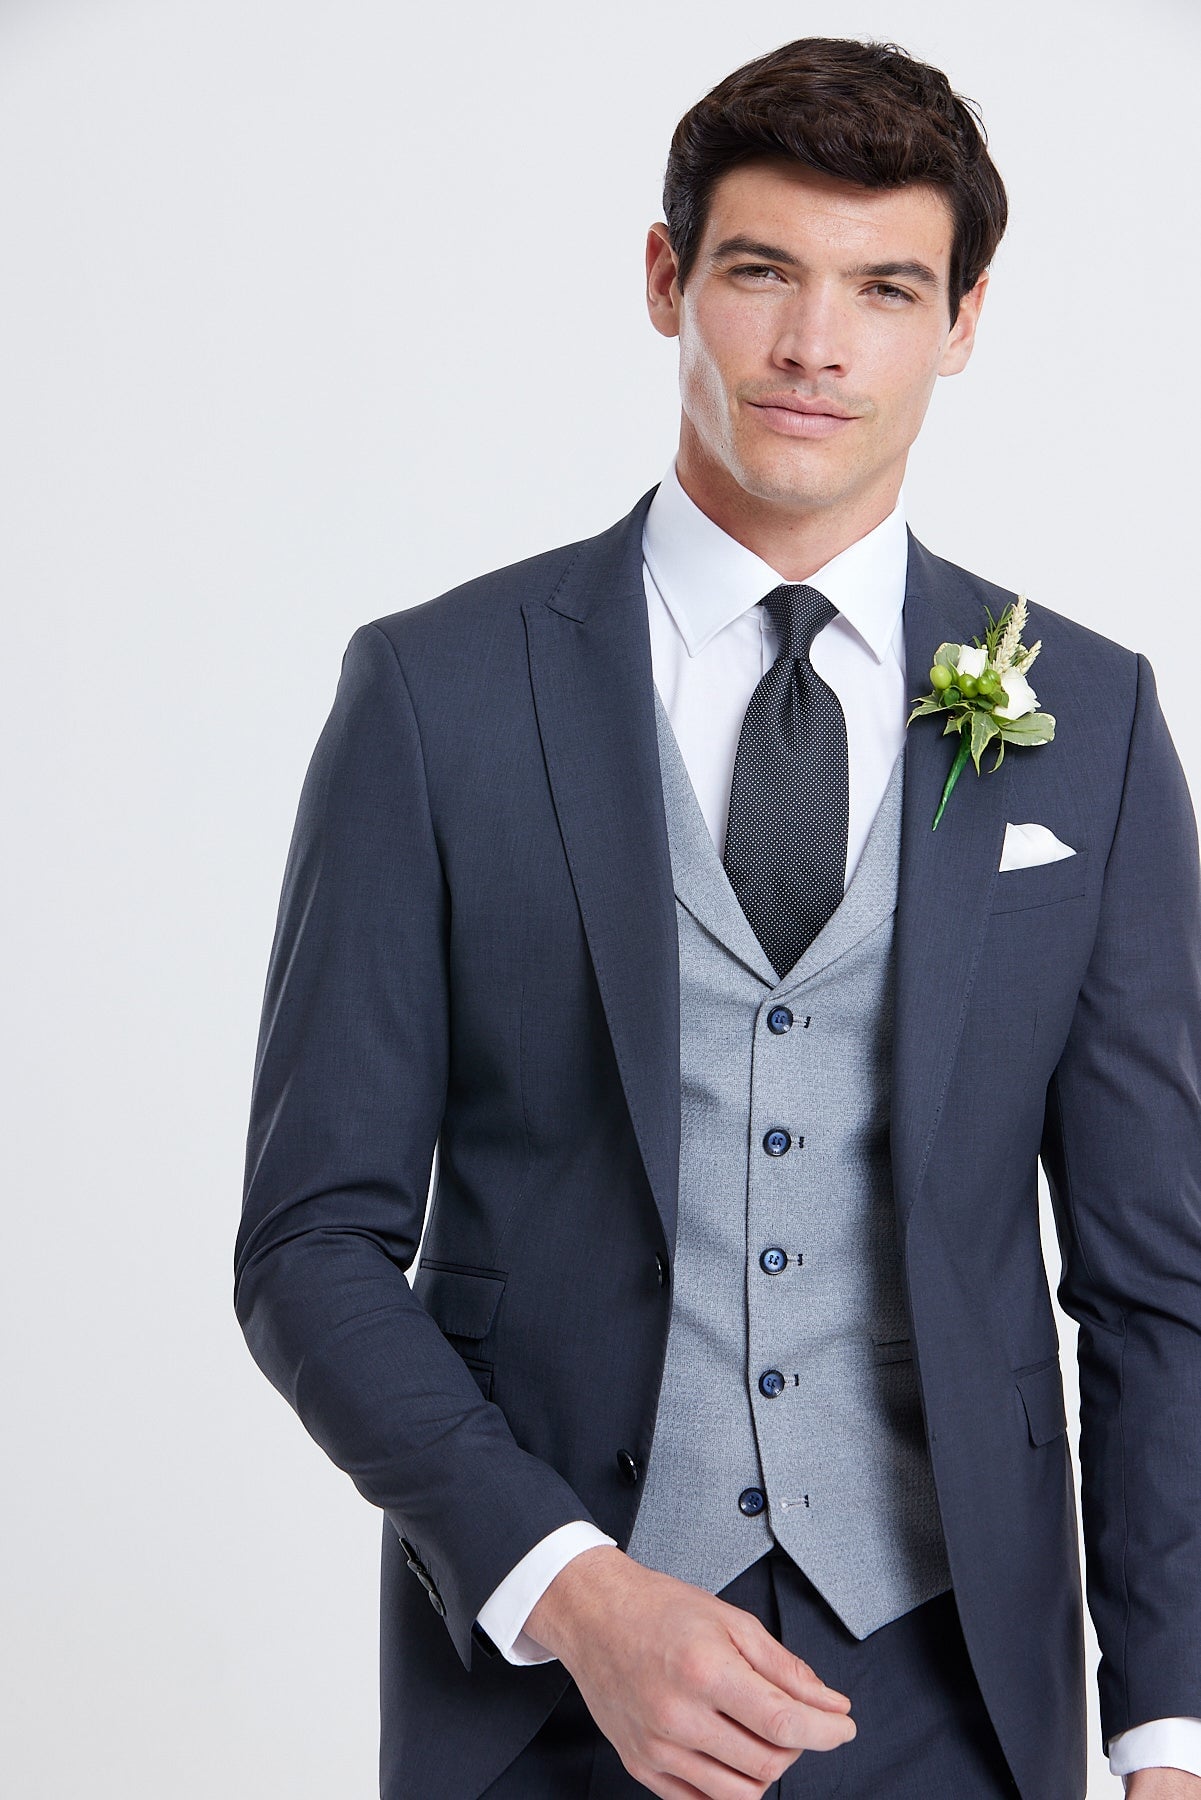 Custom Made Burgundy Dark Grey Navy Blue Waistcoat Suit For Men Perfect For  Weddings, Proms, And Special Occasions Groom Terno Masculino Man Tuxedo  Wear 2021 From Uikta, $72.81 | DHgate.Com